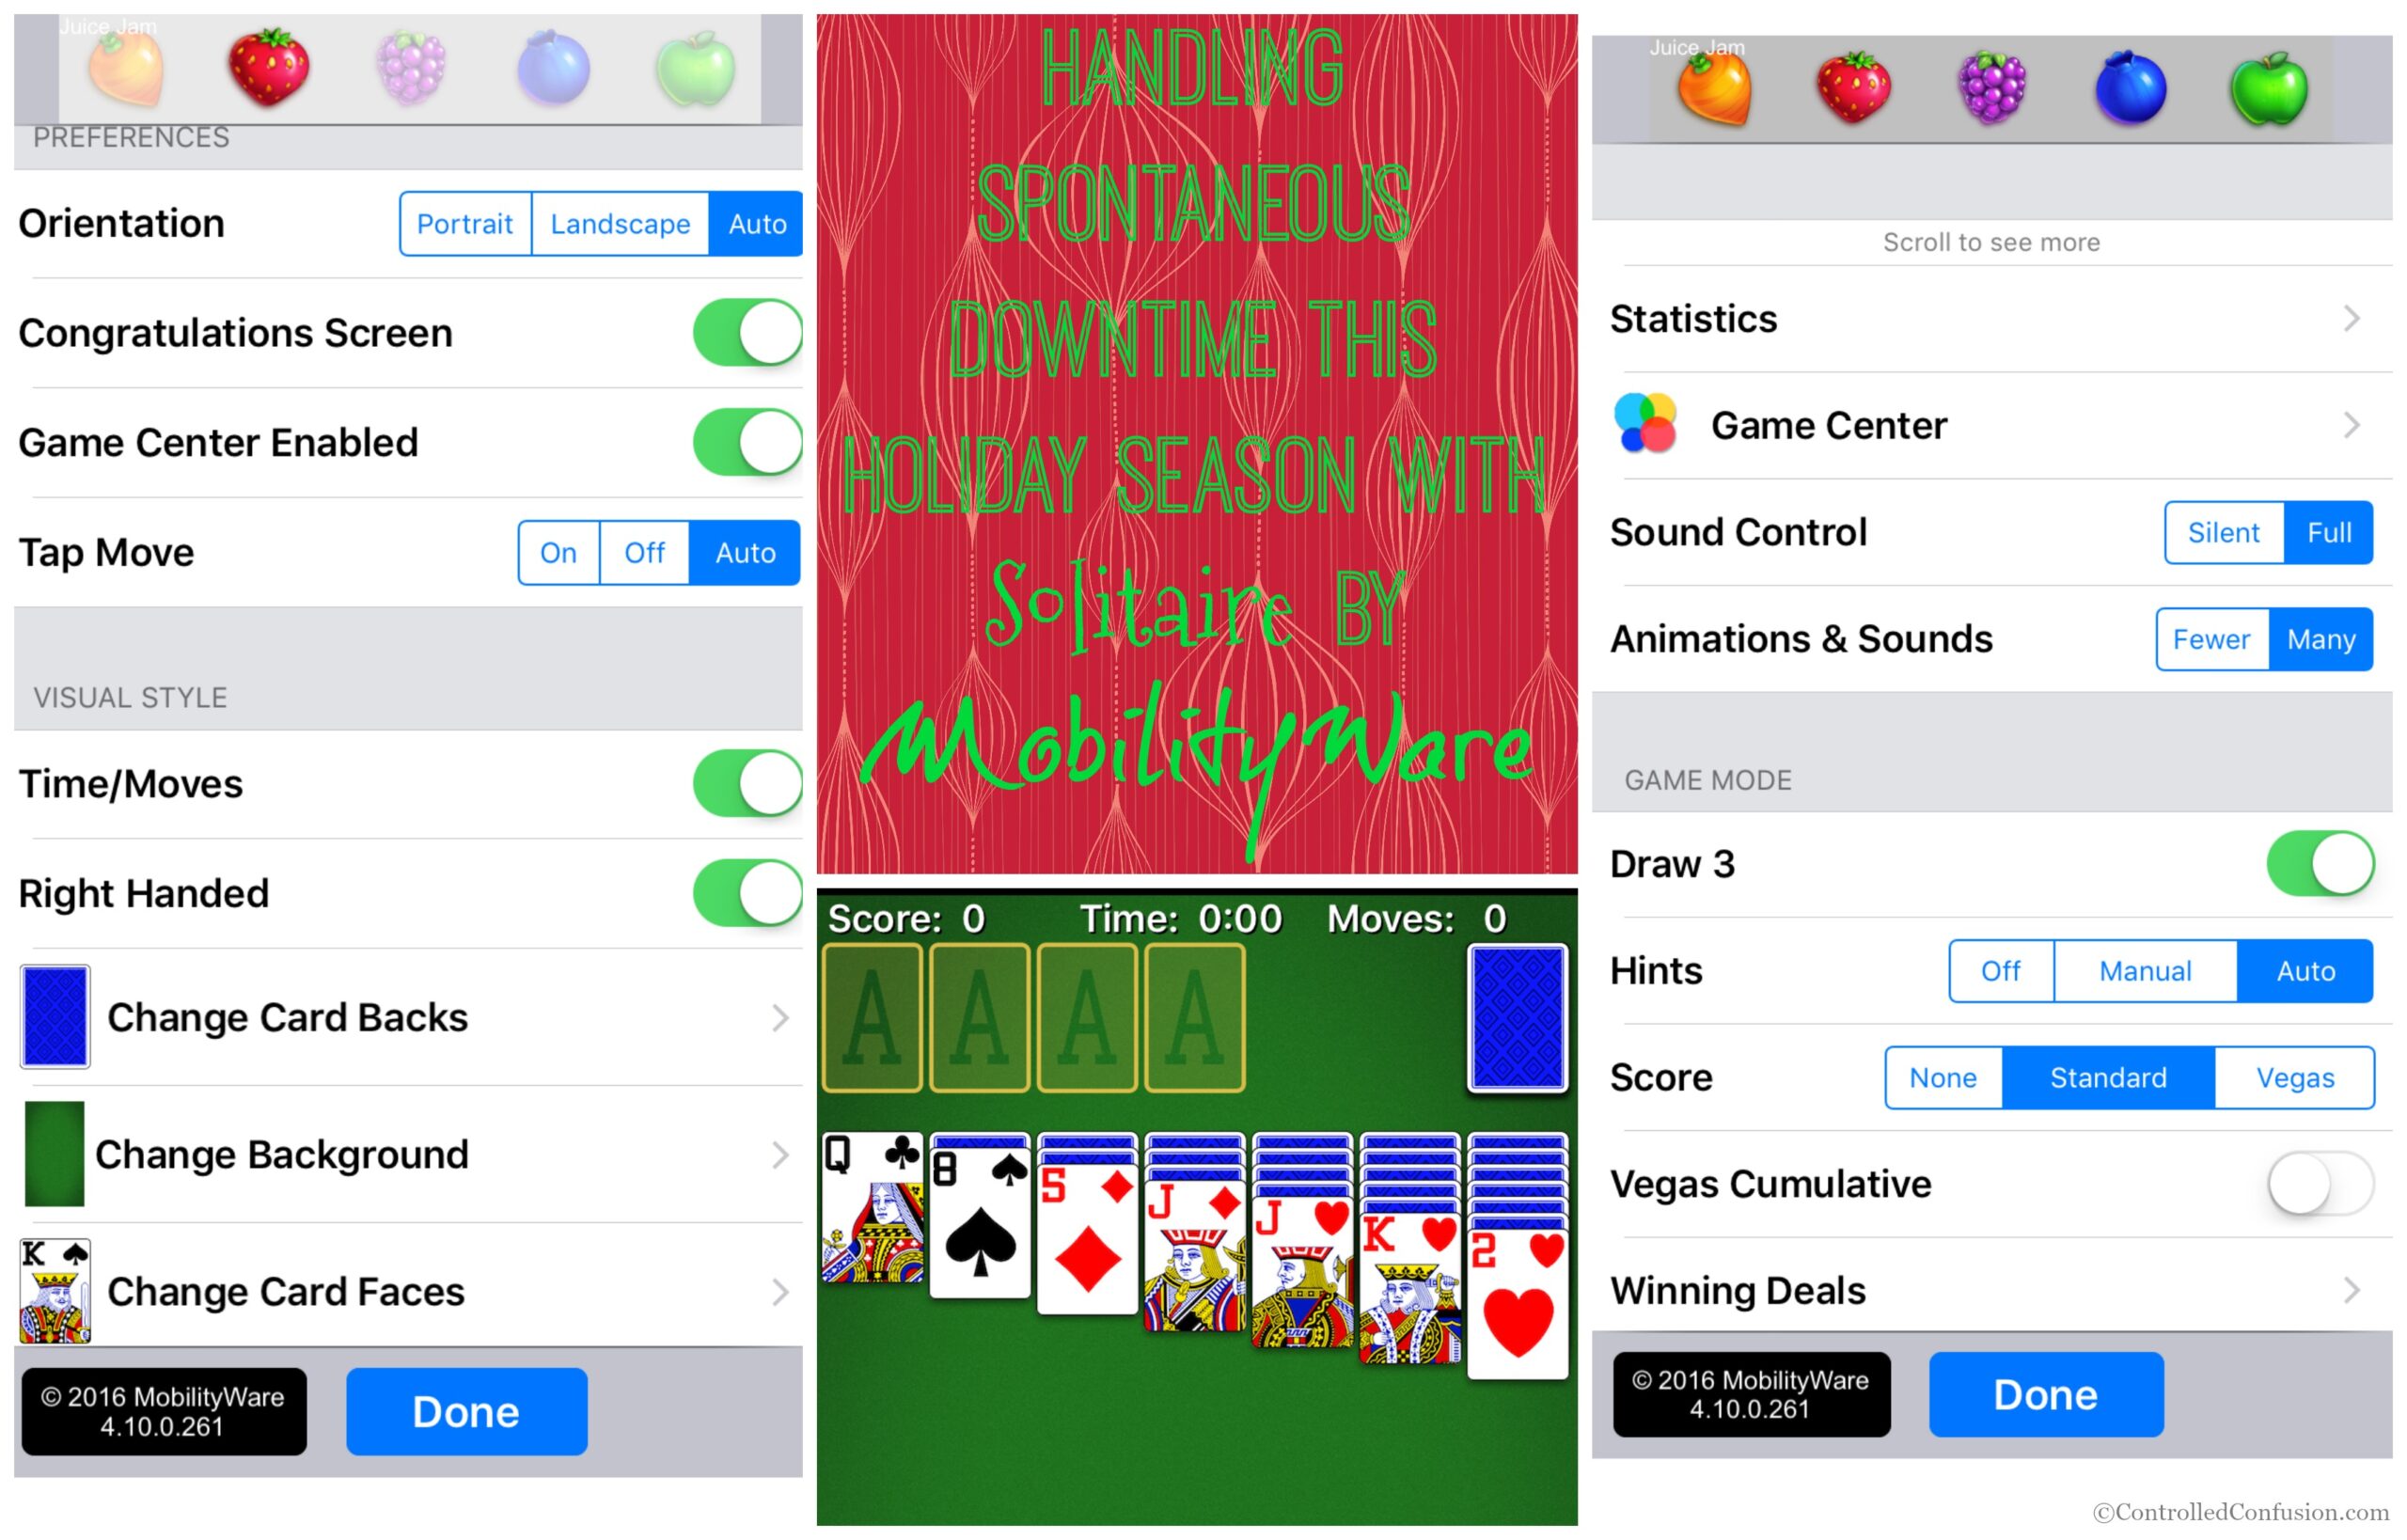 Handling Spontaneous Downtime This Holiday Season With Solitaire By MobilityWare